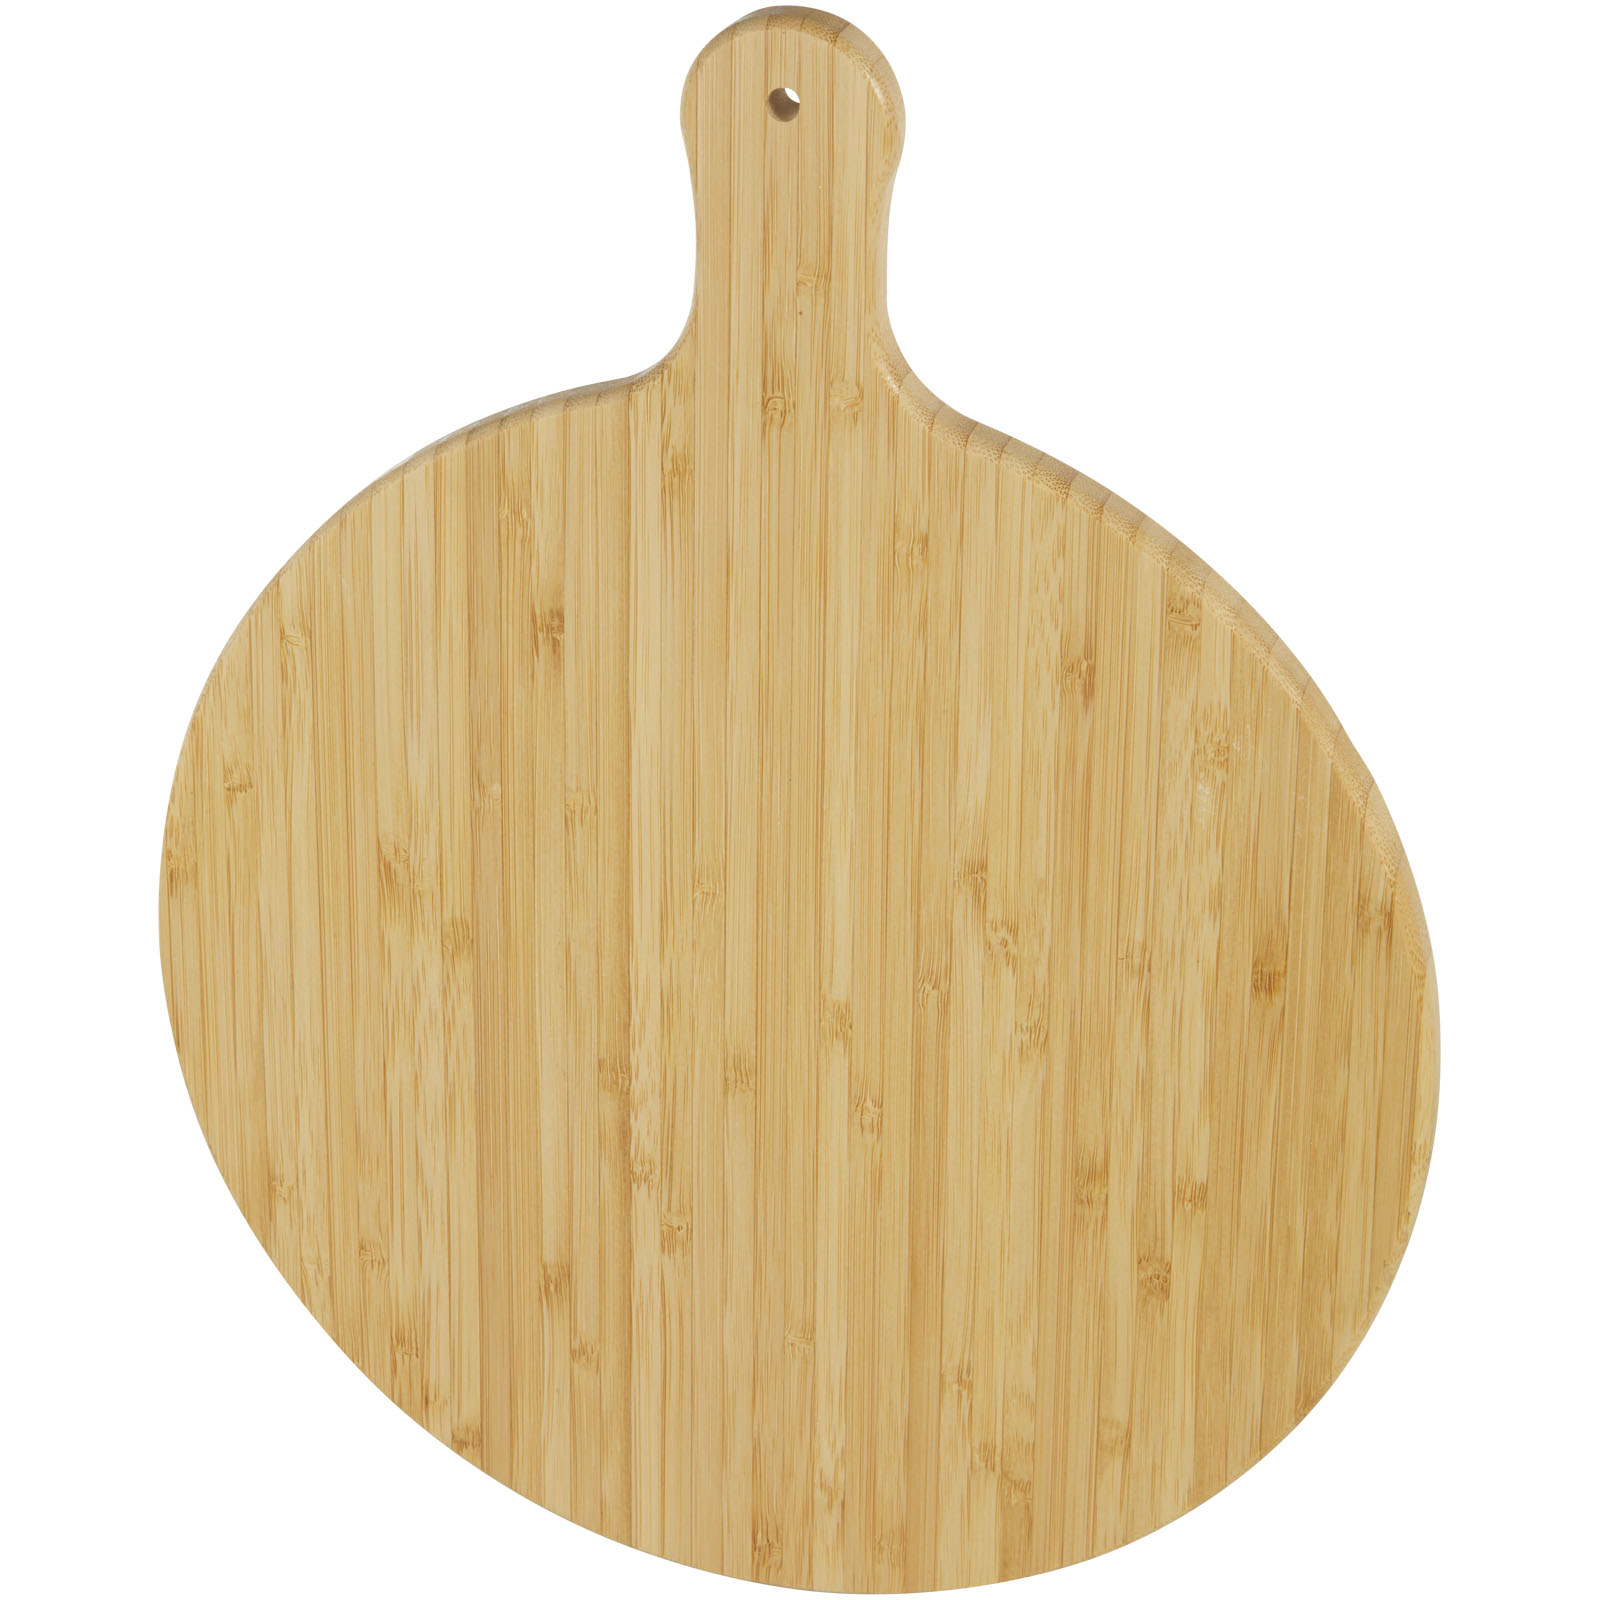 Home & Kitchen - Delys bamboo cutting board